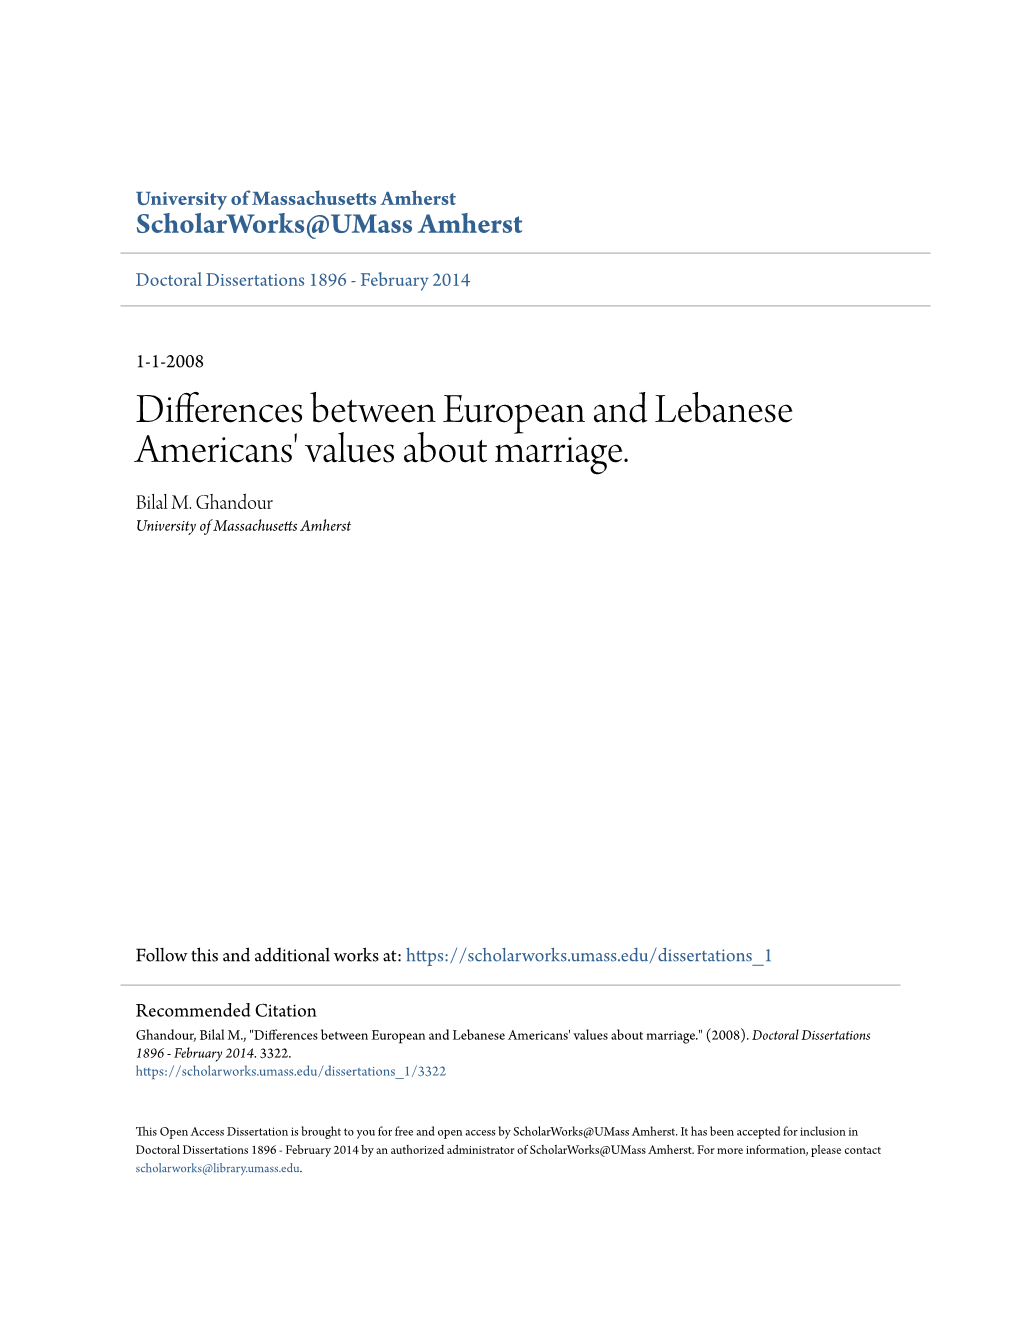 Differences Between European and Lebanese Americans' Values About Marriage